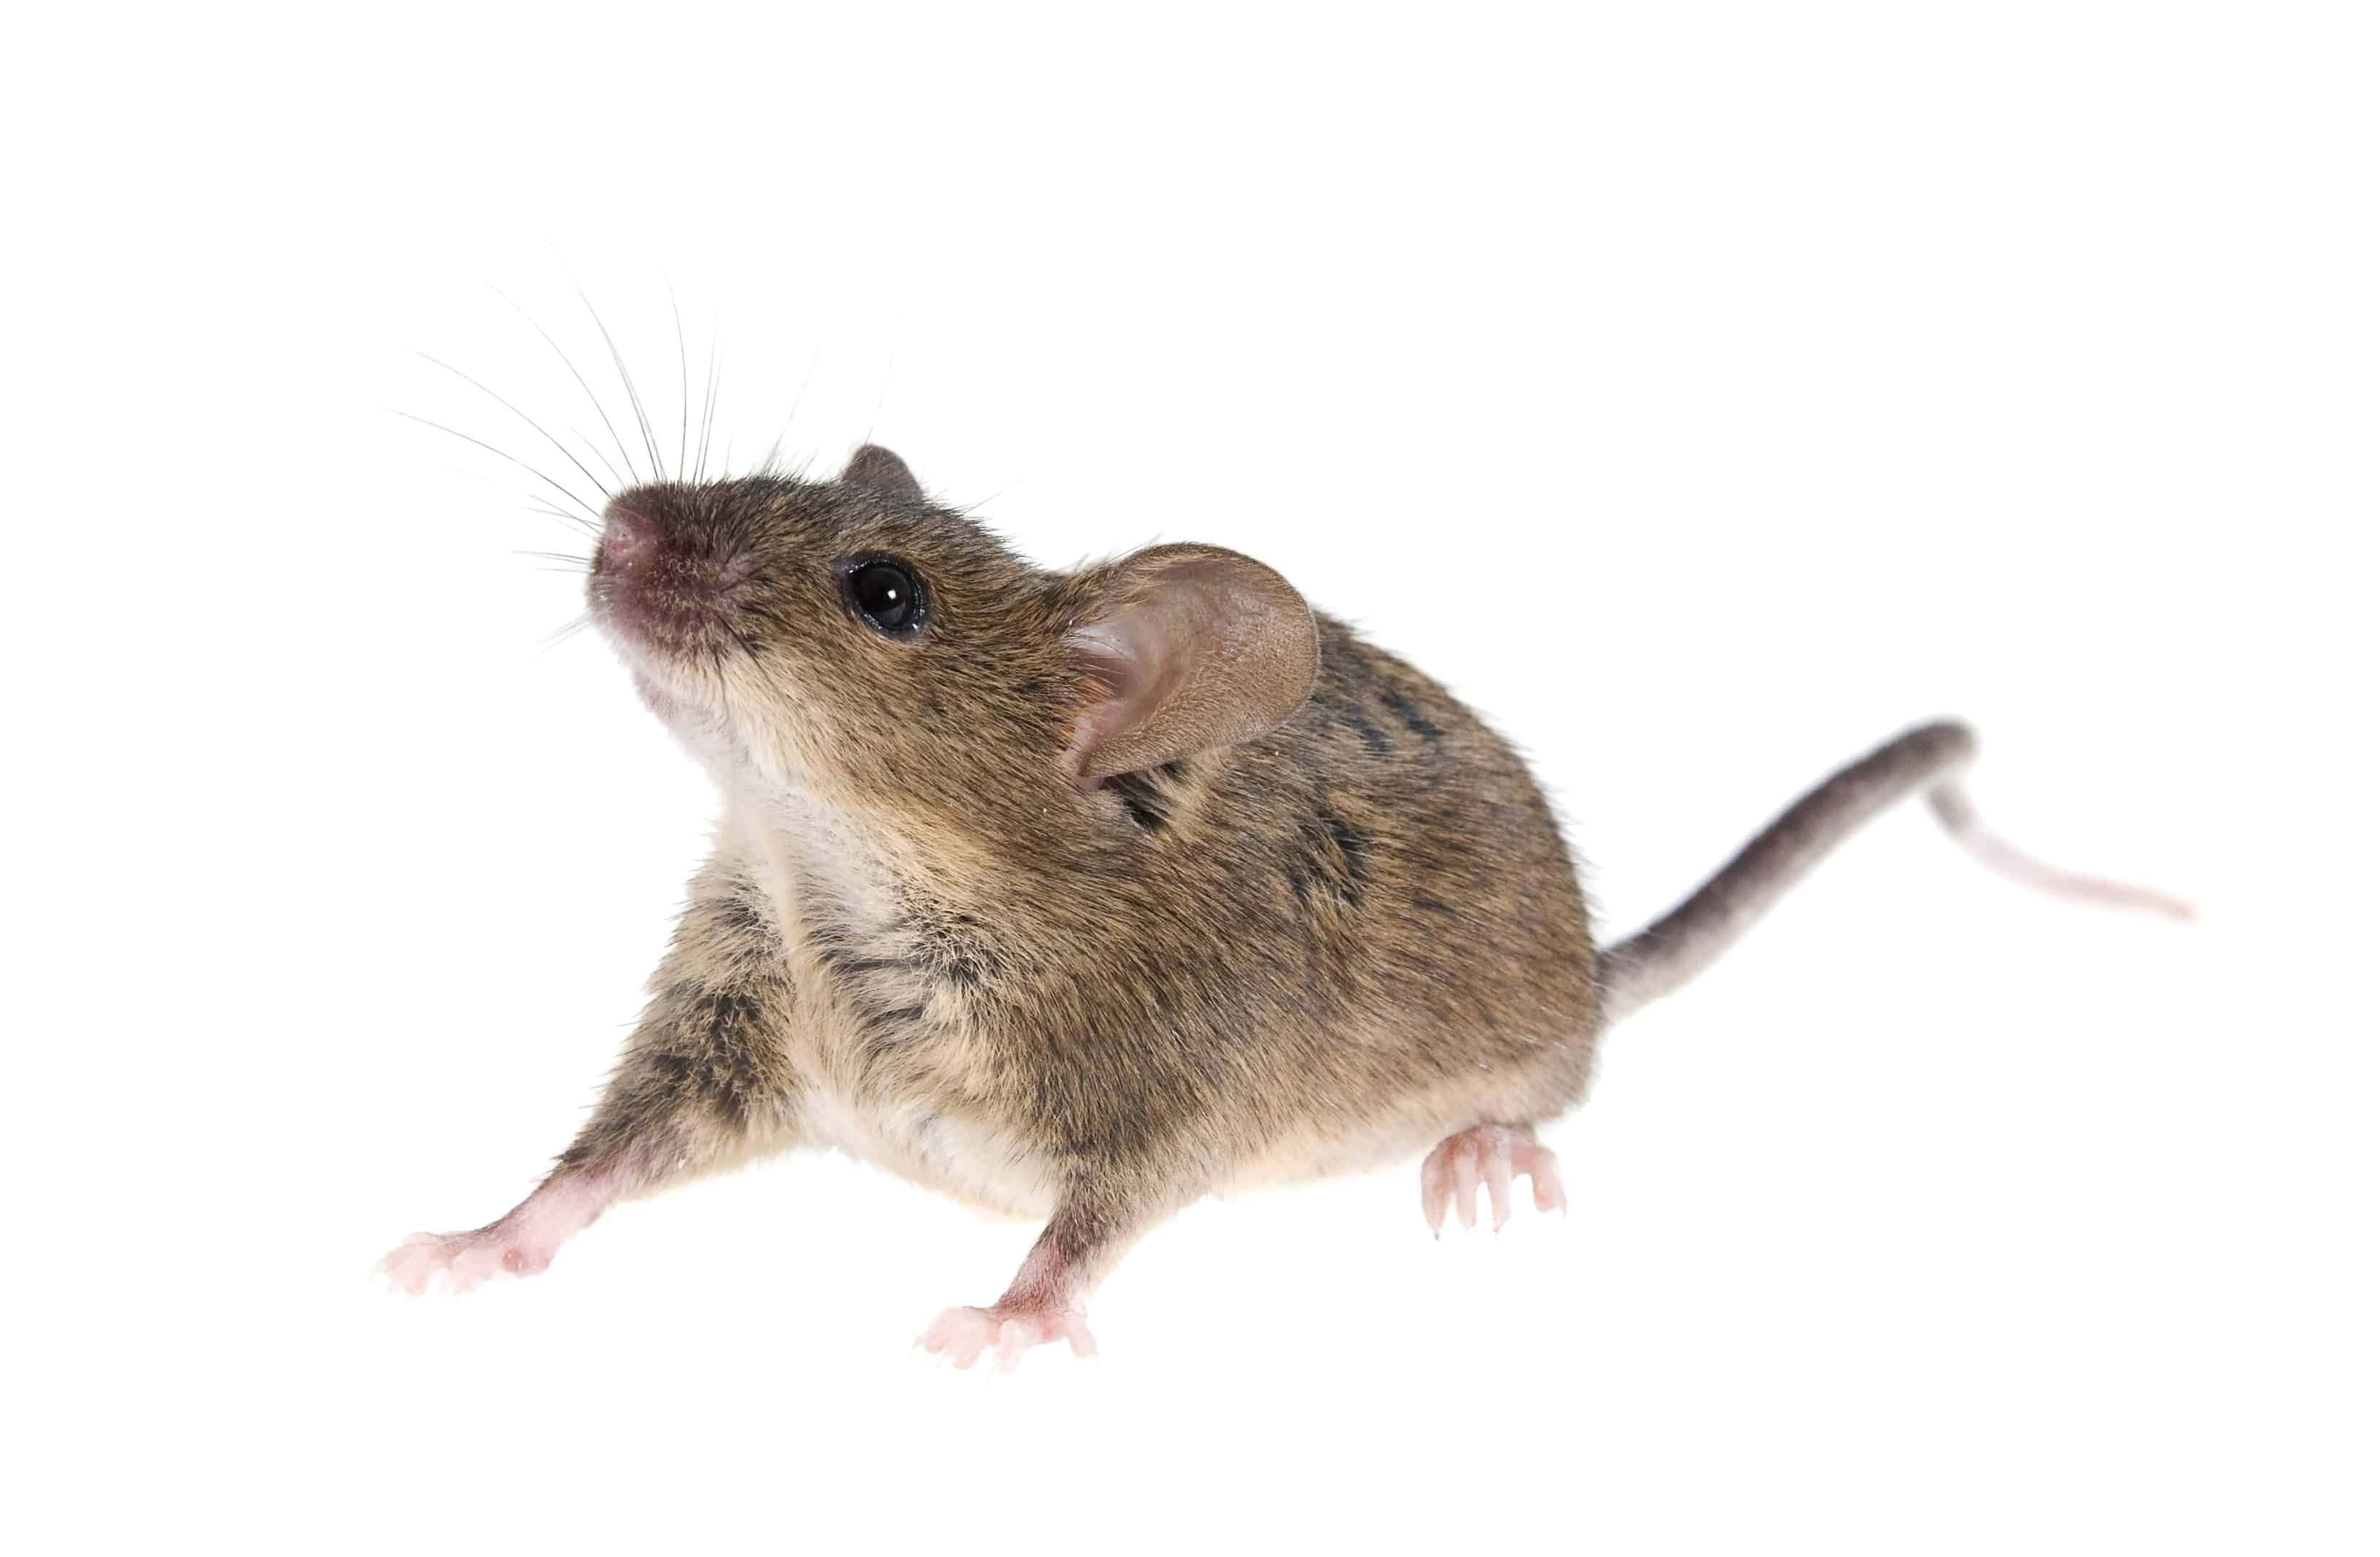 Buyer beware: Mouse traps used outdoors often injure other